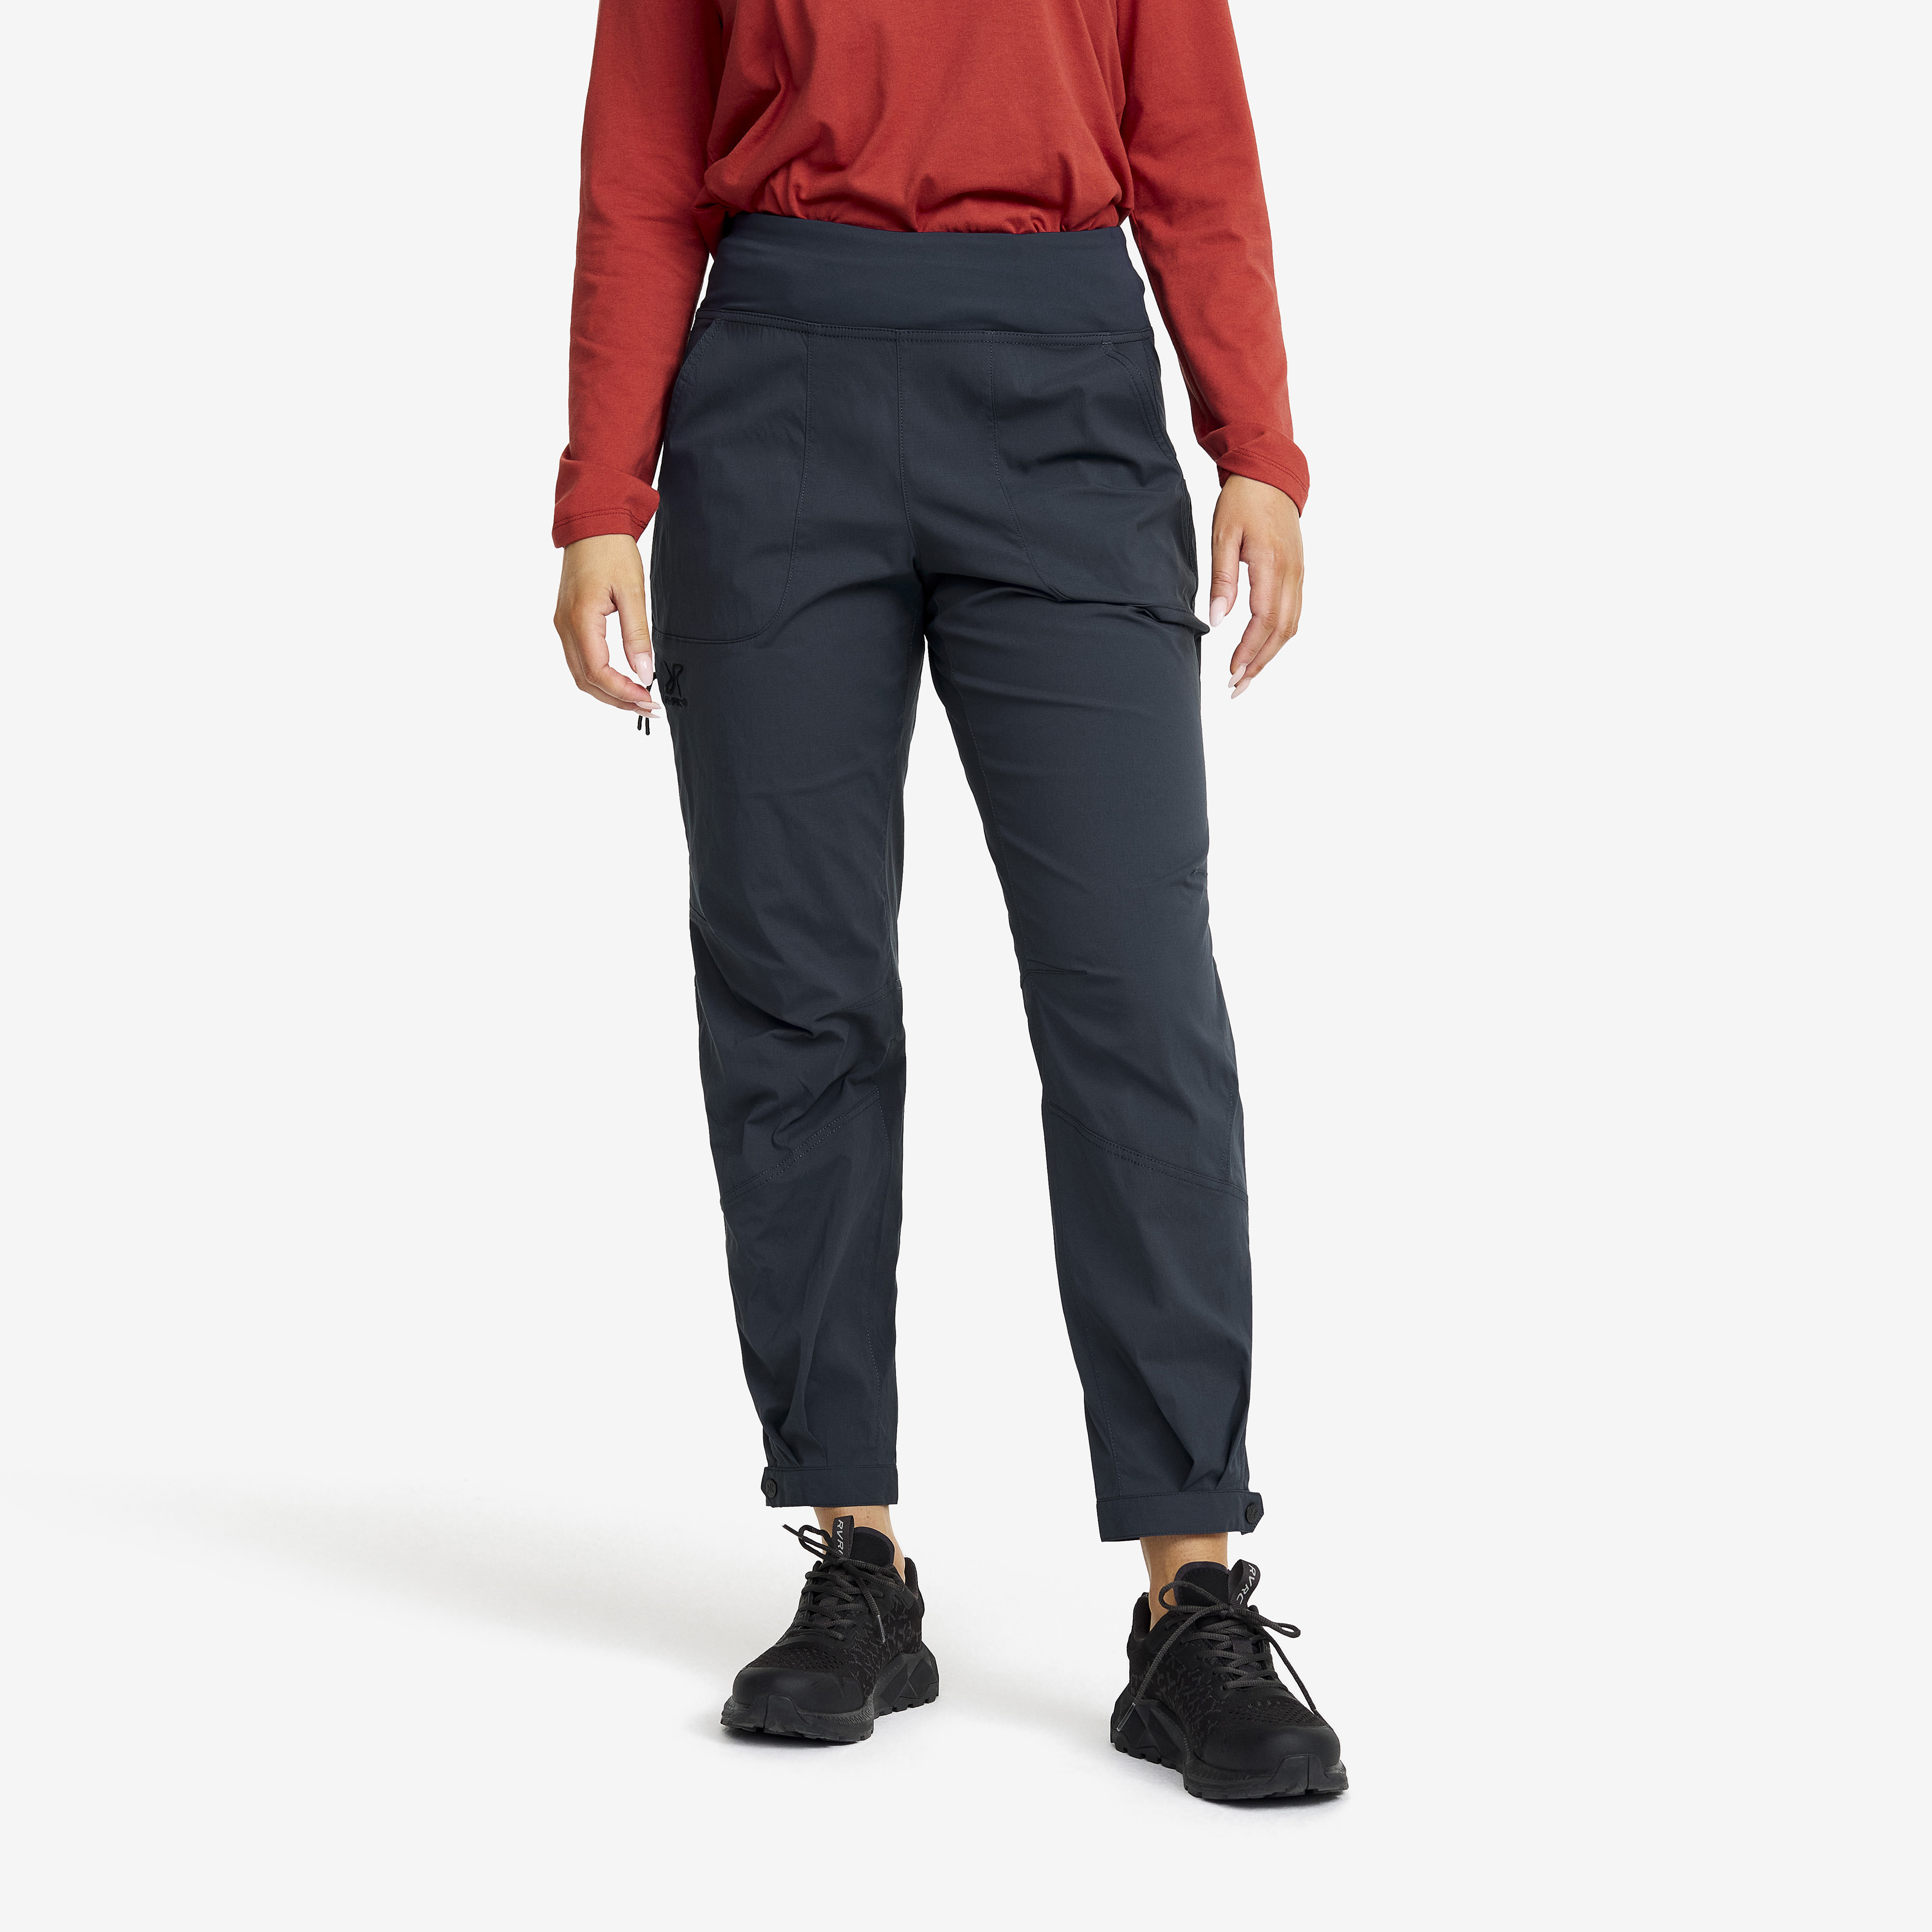 Breezy Outdoor Pants Blueberry Naiset